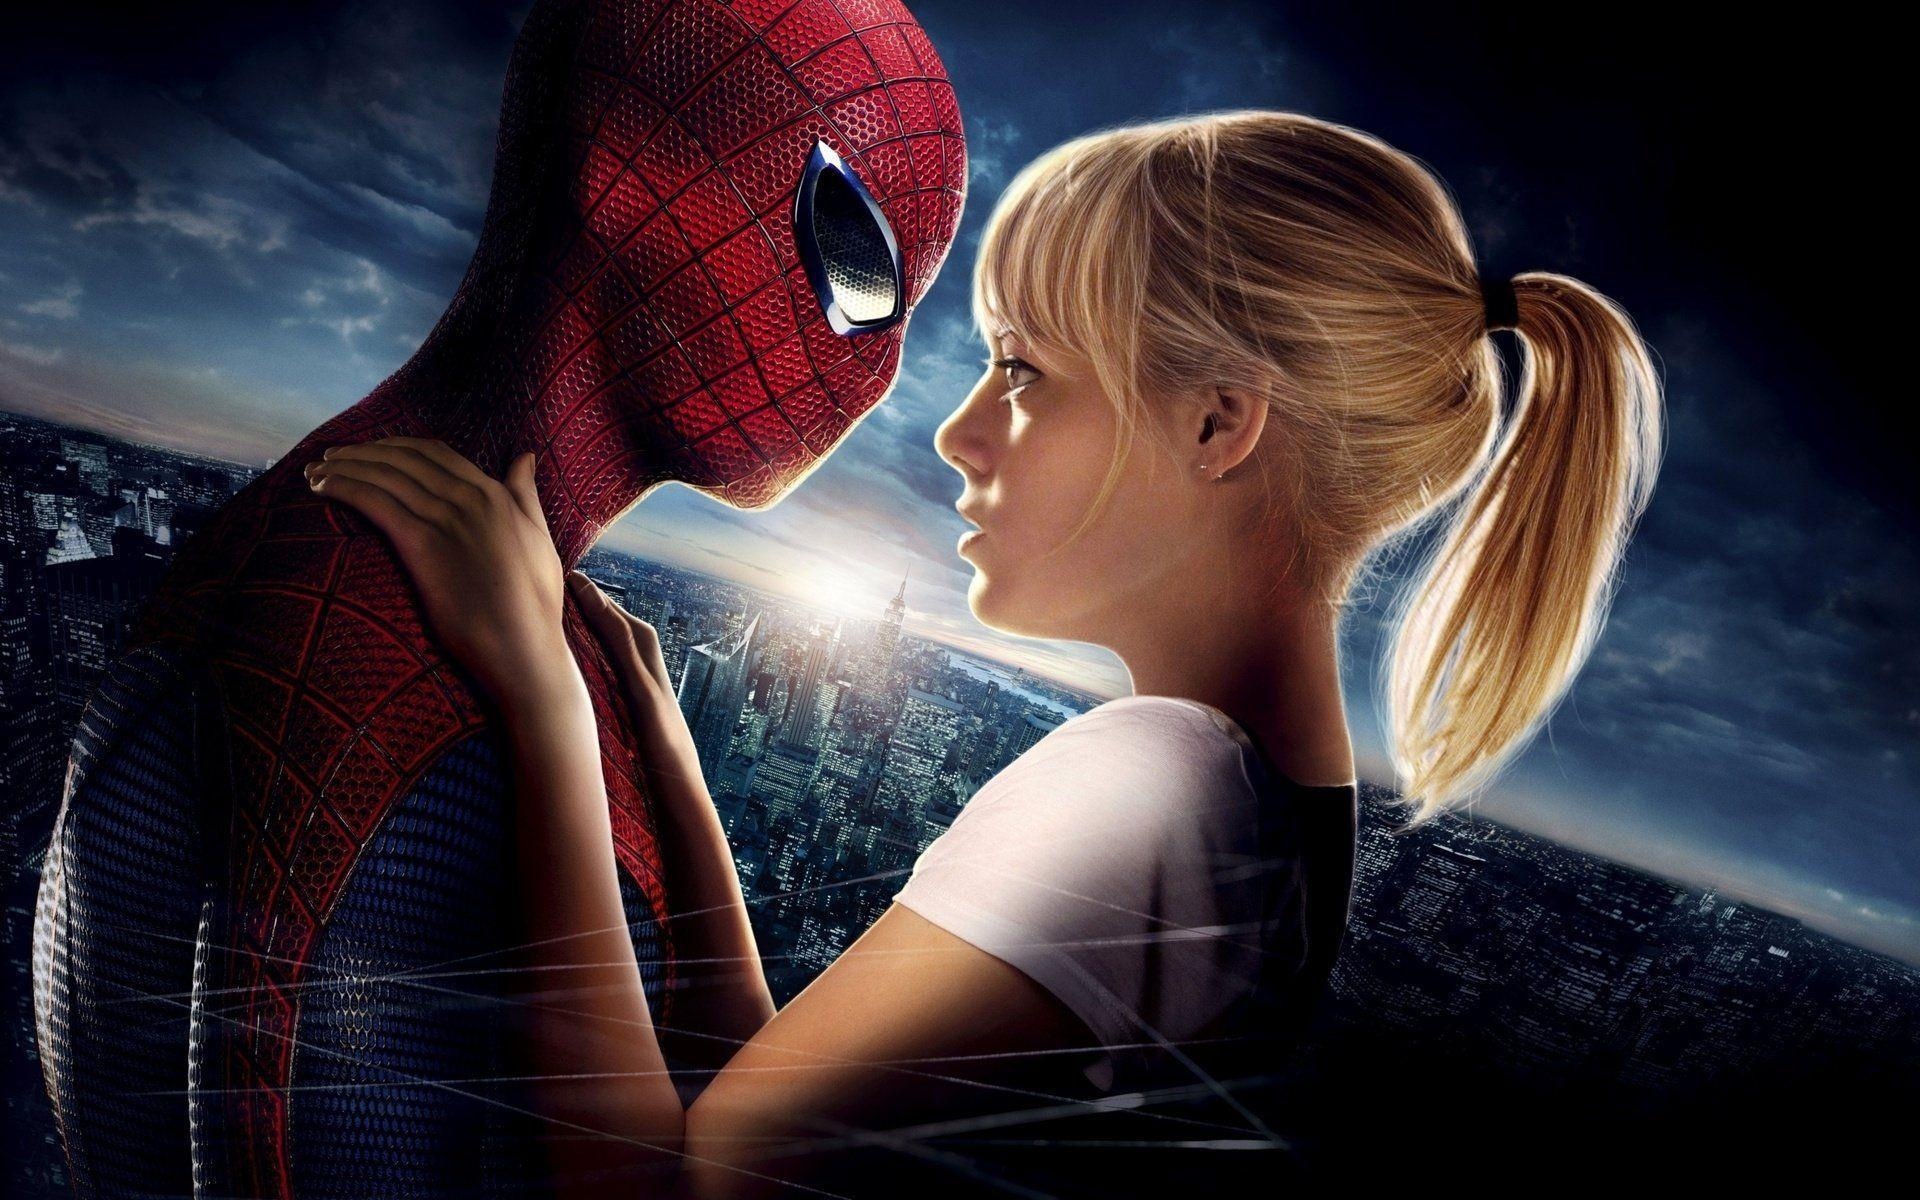 Spider-Man and Gwen Stacy, Vivid backgrounds, Dynamic duo, Love story, 1920x1200 HD Desktop